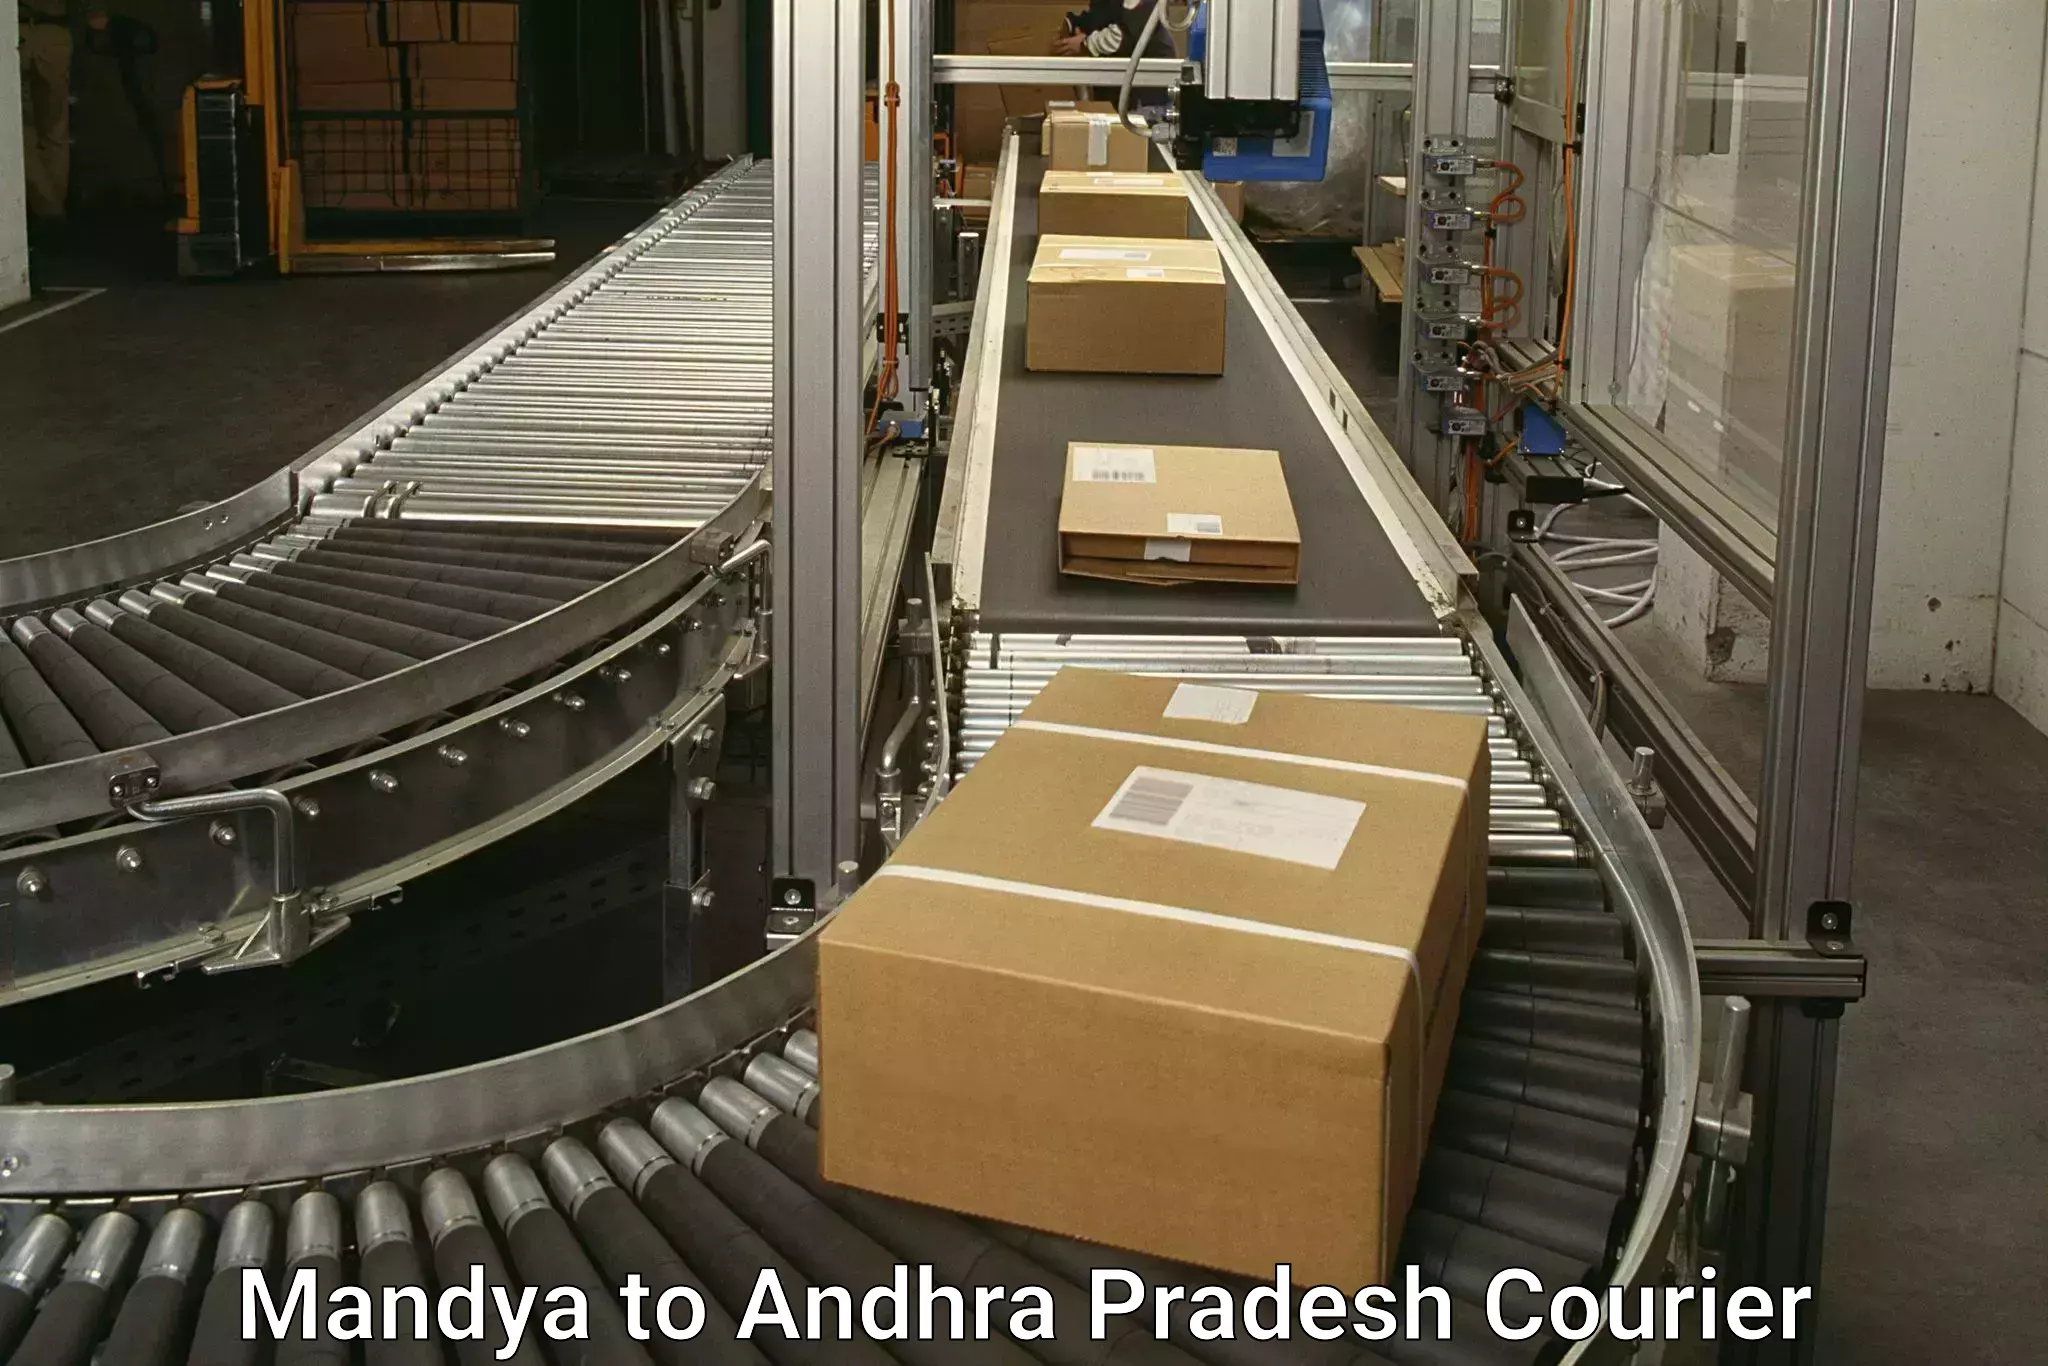 On-call courier service Mandya to Bhimadole